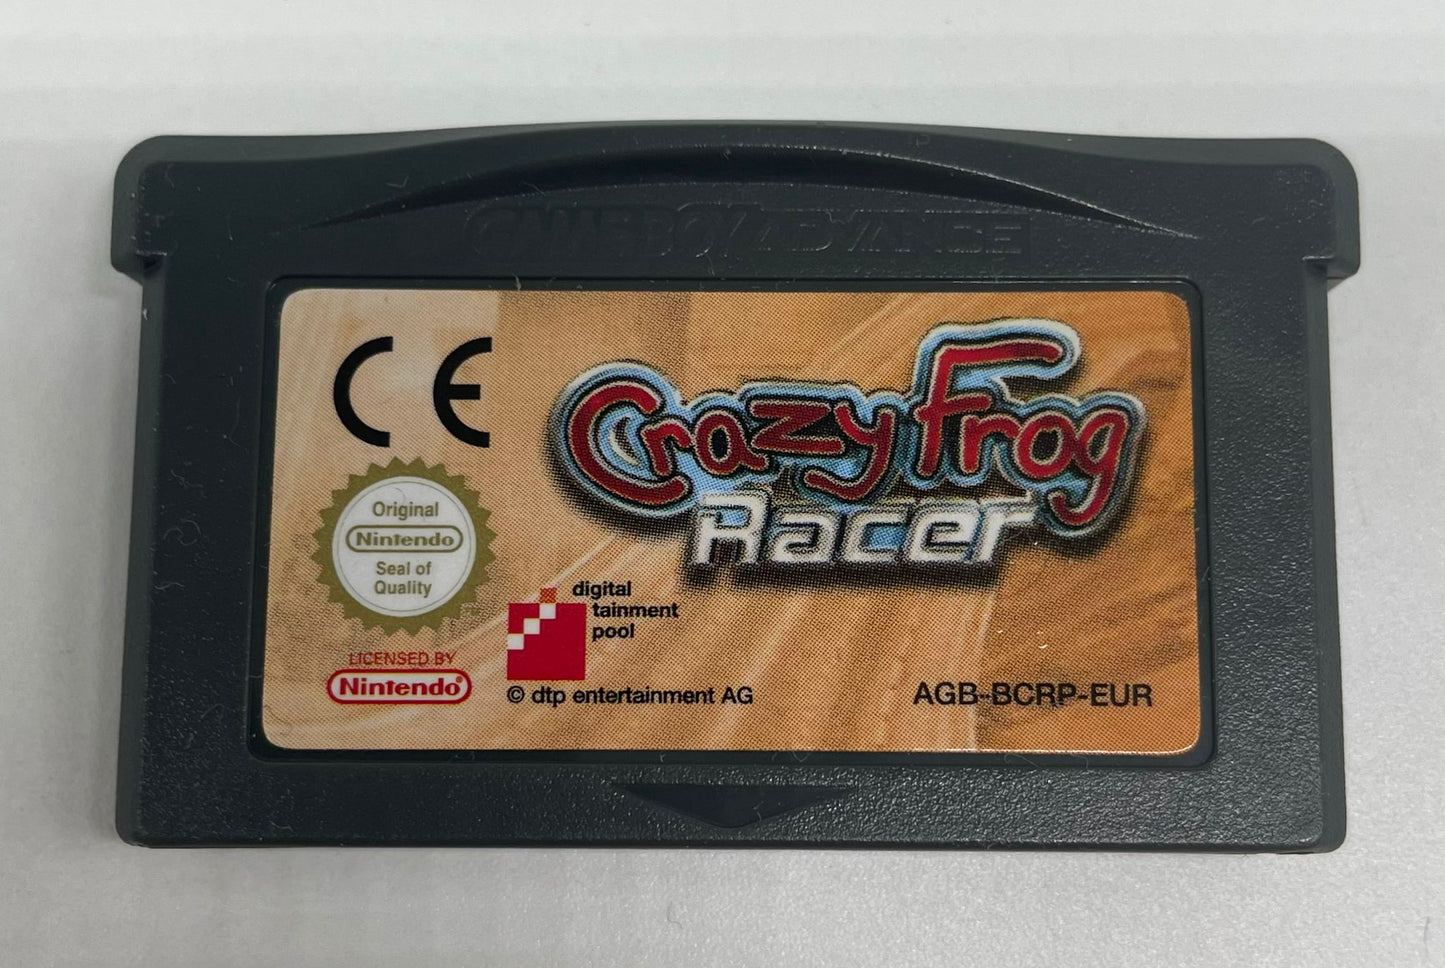 Crazy Frog Racer GBA